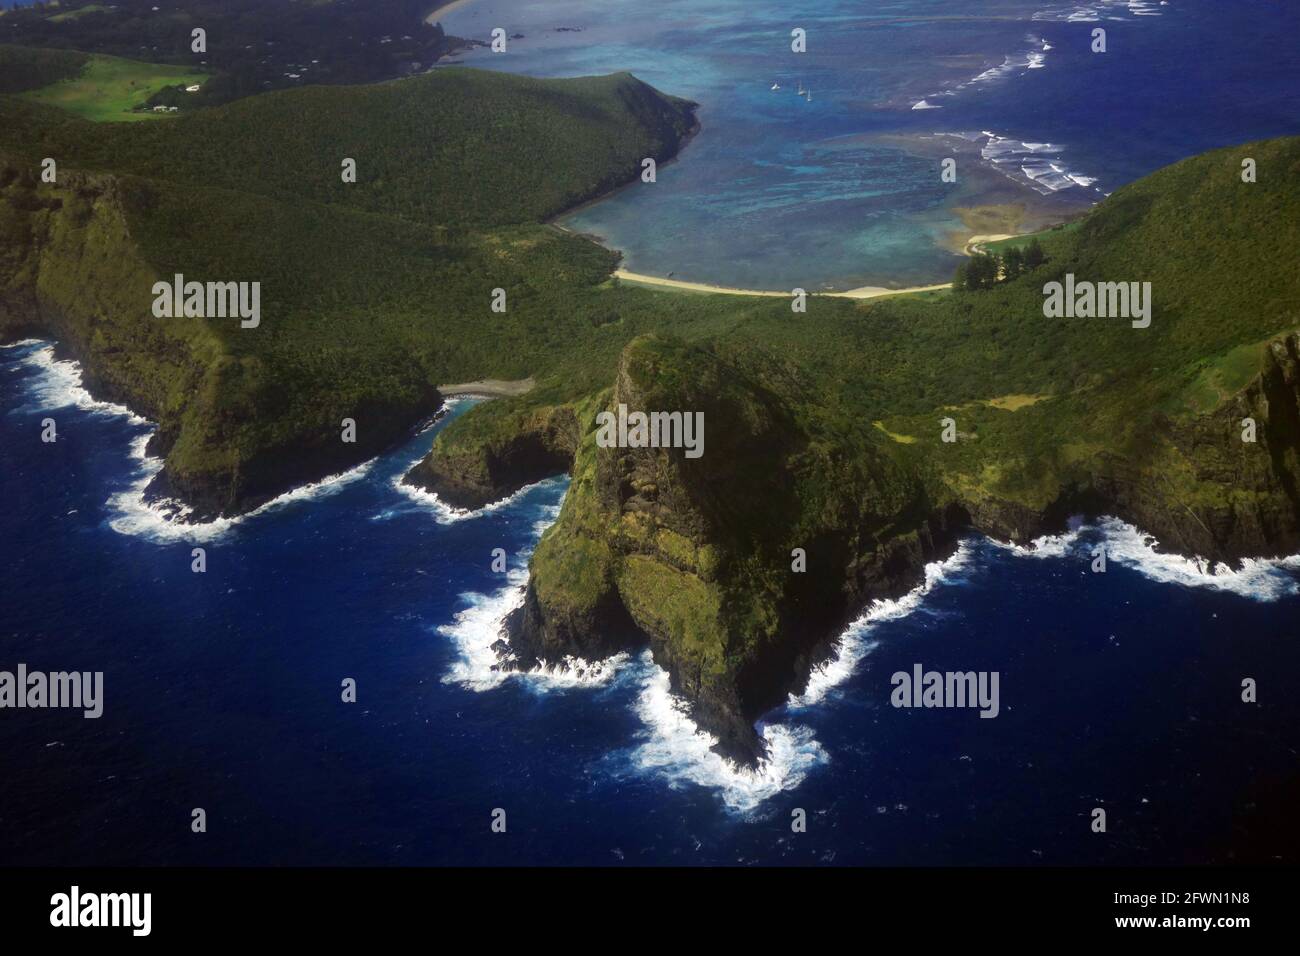 Aerial view of Mt Eliza and the Malabar coastline, northern end of Lord Howe Island, NSW, Australia Stock Photo